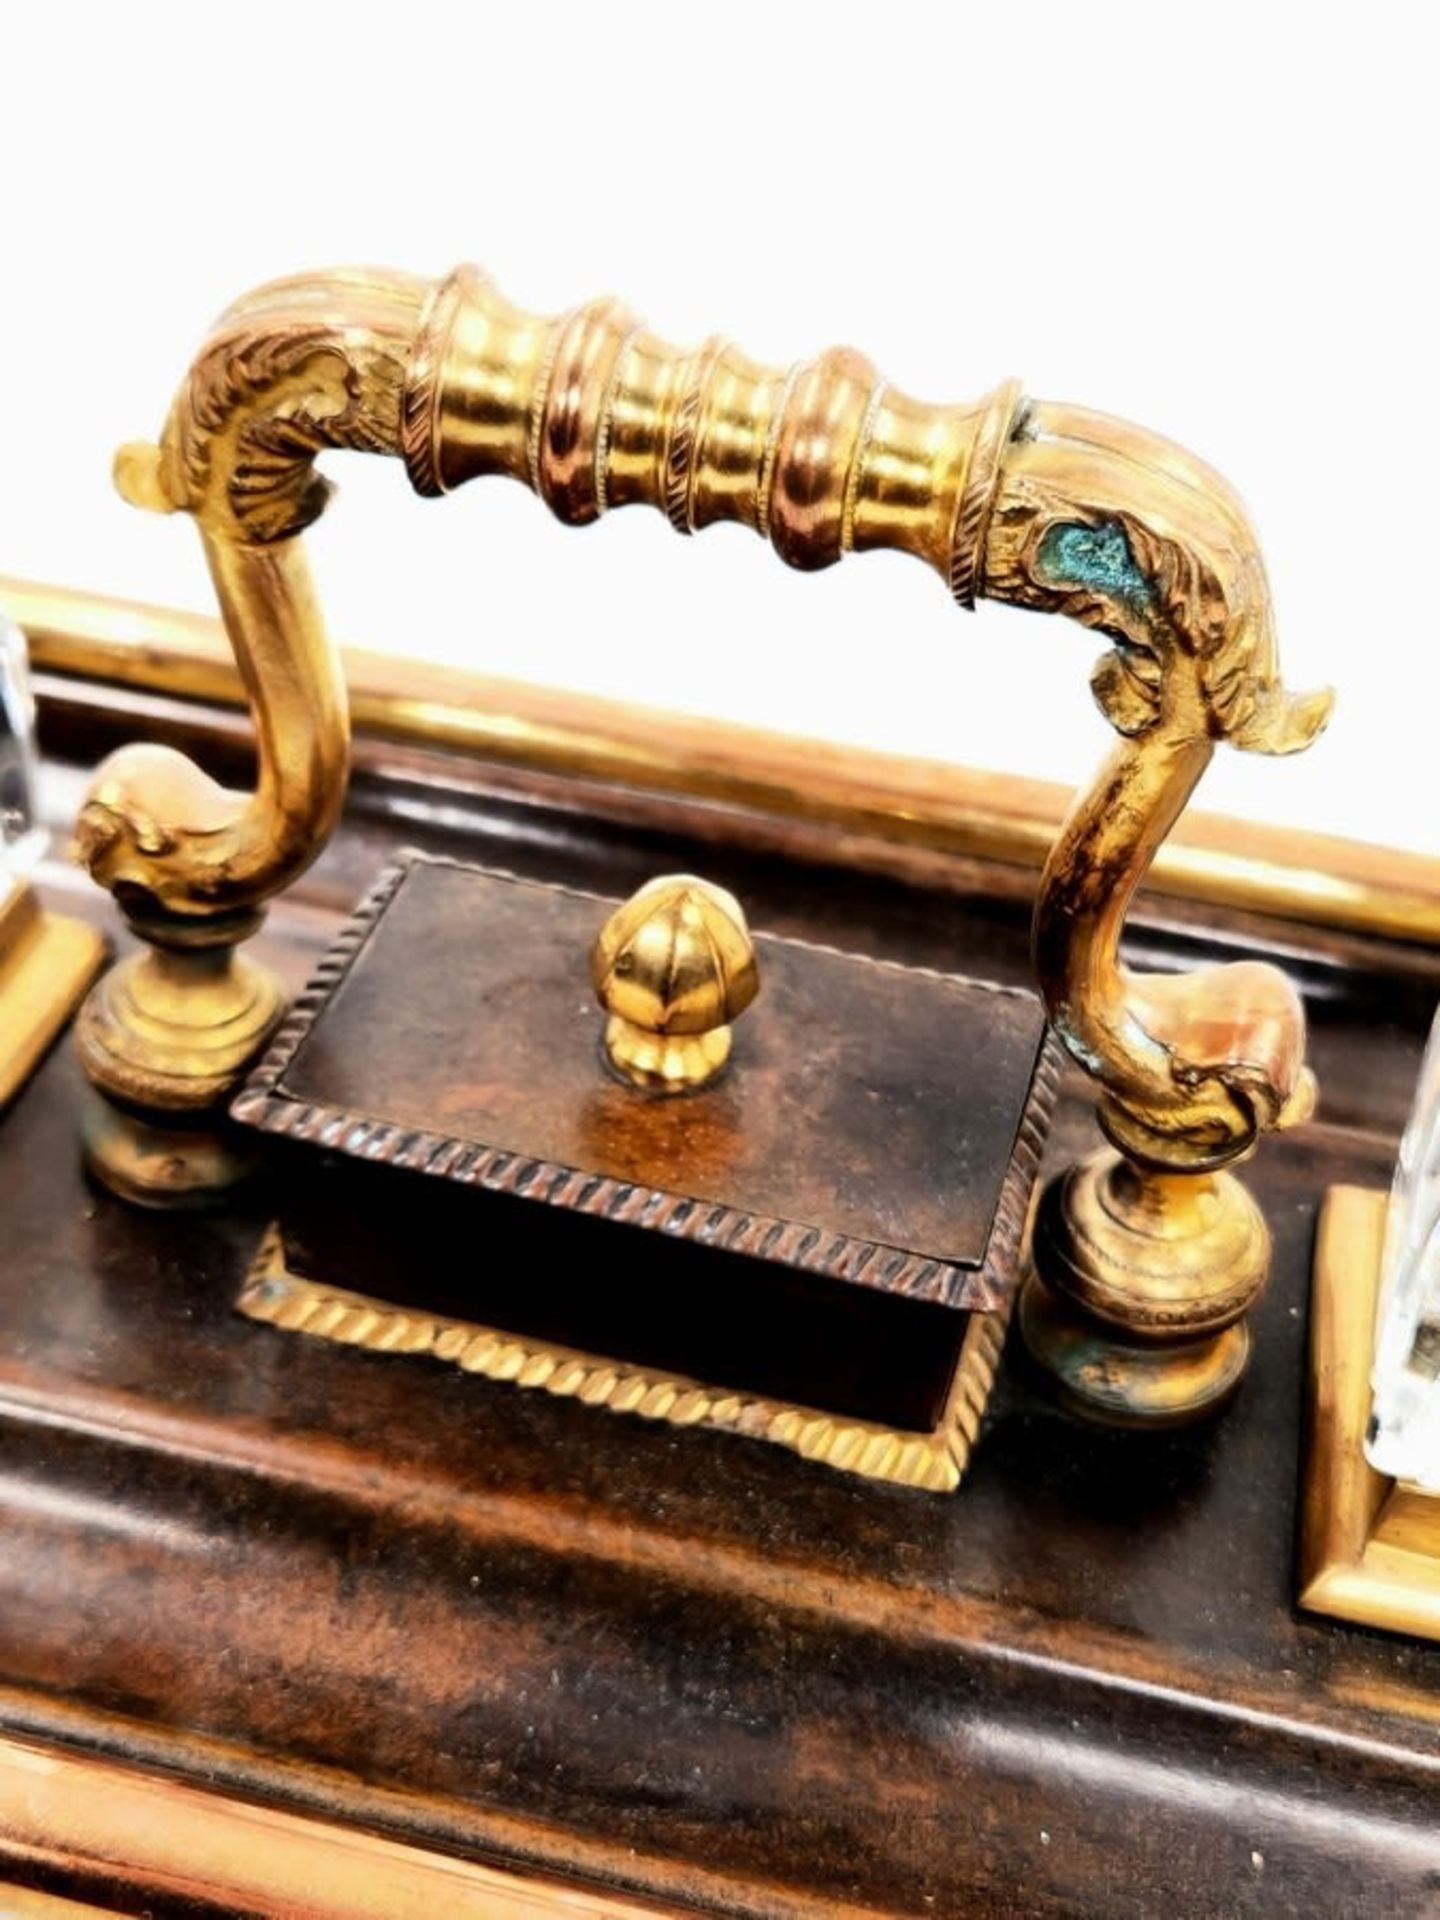 An antique double tabletop inkwell, brass and spelter, the ink wells themselves are made of glass, - Bild 7 aus 7